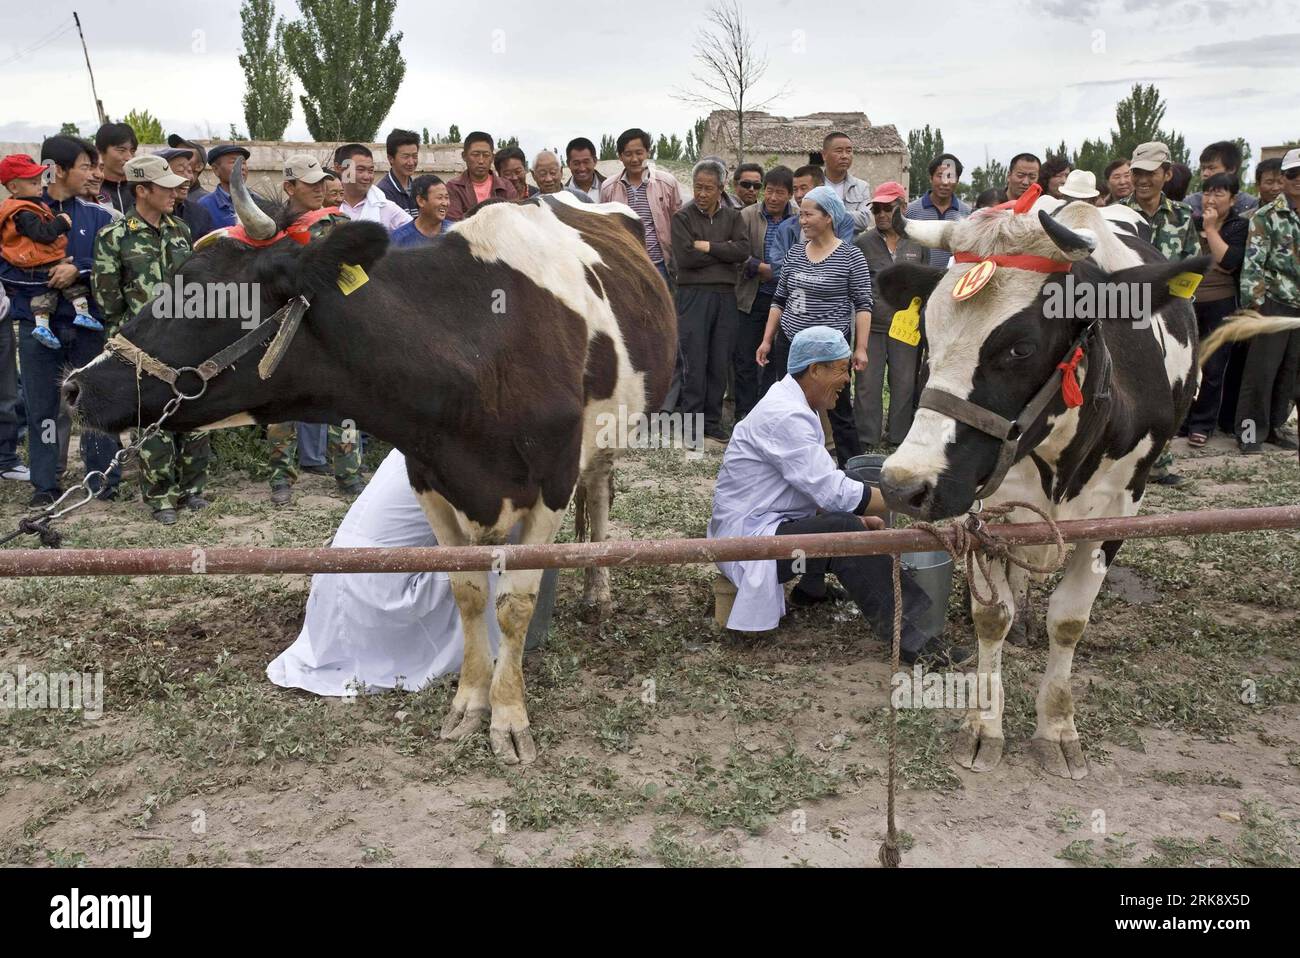 Bildnummer: 54081274  Datum: 27.05.2010  Copyright: imago/Xinhua (100527) -- QAPQAL(XINJIANG), May 27, 2010 (Xinhua) -- Farmers take part in a milking contest held in Aixinsheri Township of Xibe Autonomous County of Qapqal, northwest China s Xinjiang Uygur Autonomous Region, May 27, 2010. Farmers took their cows to compete in the milking contest on Thursday. The fast-growing cow breeding industry of Aixinsheri in recent years became an important source of income increase for local farmers. (Xinhua/Liu Chenggang) (zgp) (5)CHINA-QAPQAL-MILKING CONTEST (CN) PUBLICATIONxNOTxINxCHN Wirtschaft Landw Stock Photo